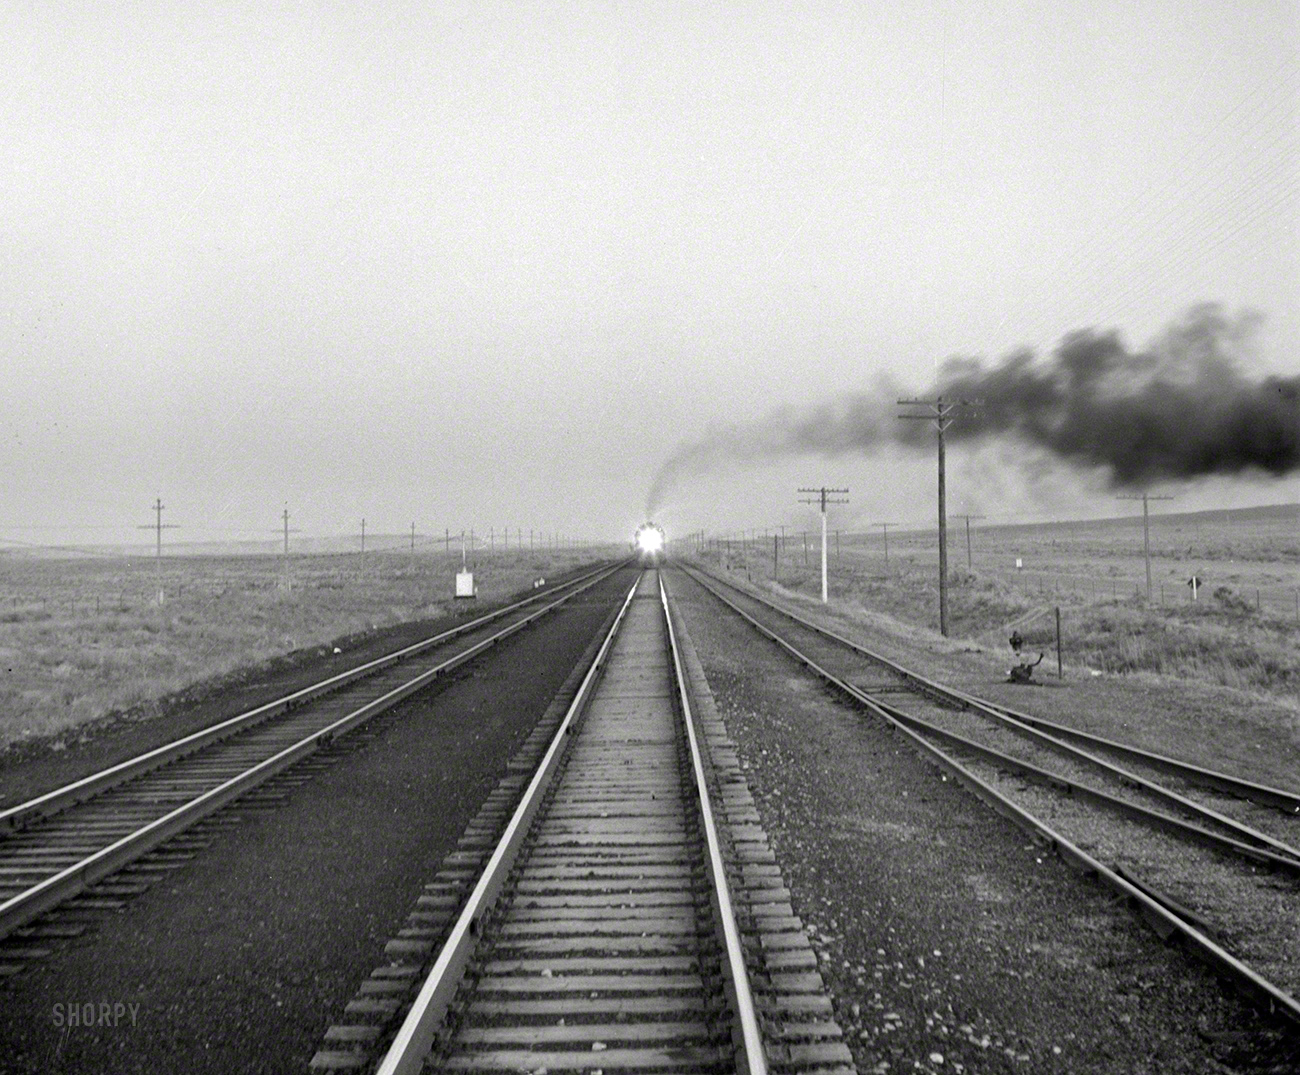 March 1943. "On the Atchison, Topeka & Santa Fe between Belen and Gallup, New Mexico." Photo by Jack Delano, Office of War Information. View full size.